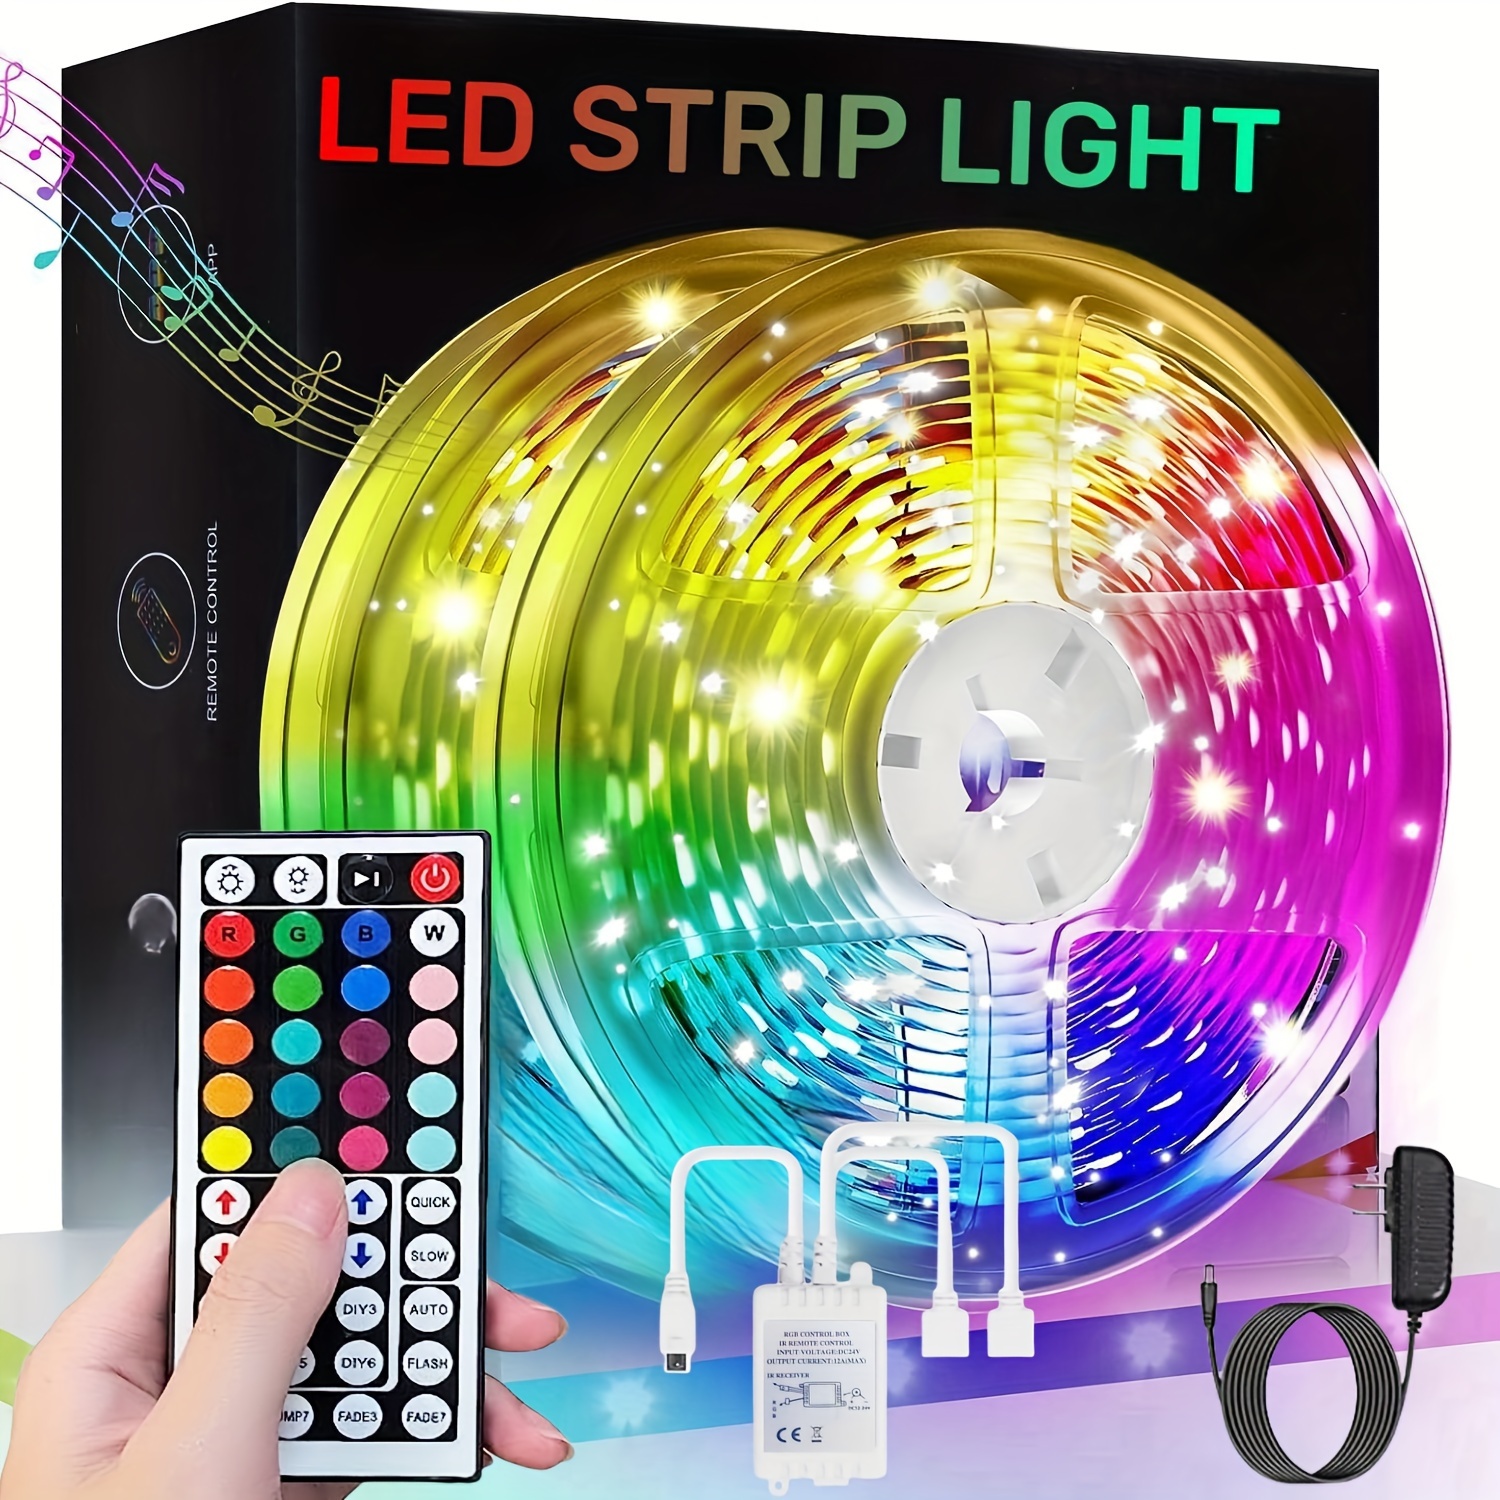 Fancy LEDs are a very cool product! This LED control box will